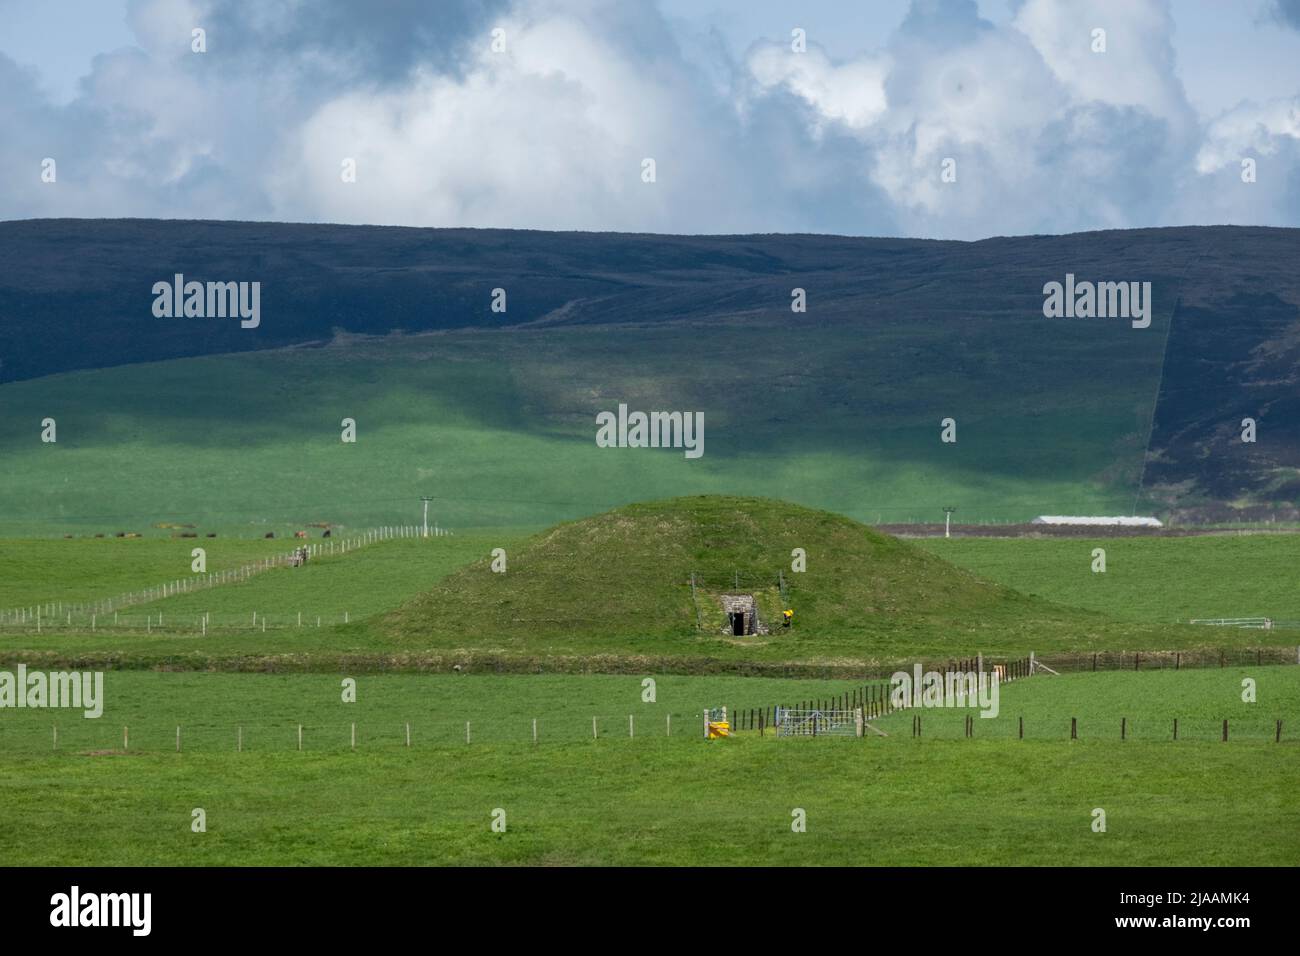 Aerial view of the Neolithic chambered cairn of Maeshowe, UNESCO World Heritage Site, Orkney Islands, Scotland, United Kingdom Stock Photo